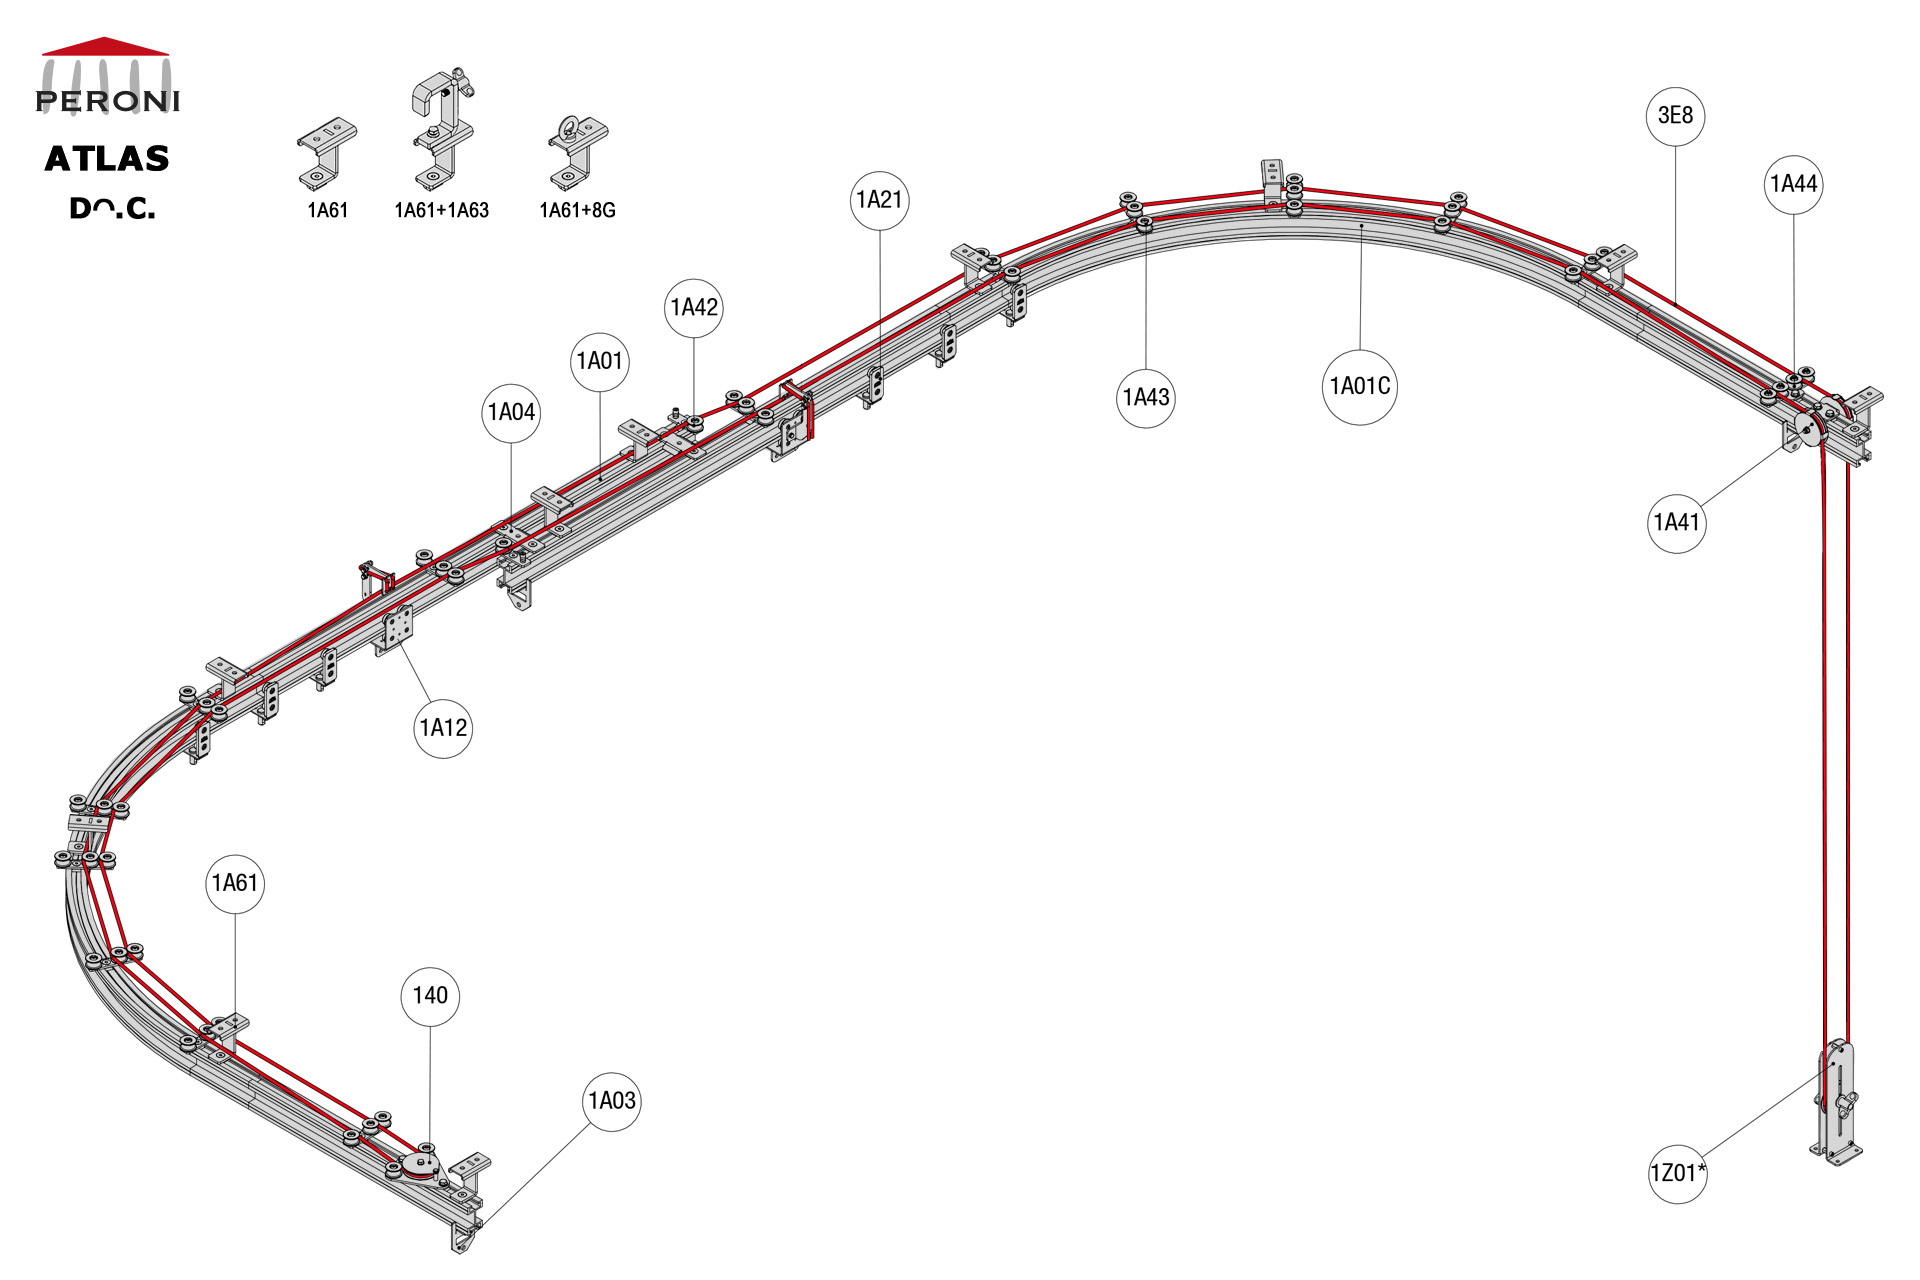 Dᴖ.C. configuration track Dᴖ. Curved double rail central openingC. Corded manualcentral overlap exceeding 50 cmComponents1A01 - Straight rail1A01C - Curved rail1A02 - Connection set1A03 - End stop1A04 - Overlap bridge1A12 - Top cord master carrier1A20 - 2 Wheel runnerMotion control1A40 - Return pulley1A41 - Head double pulley1A42 - Top cord guide for overlap1A43 - Top cord guide1A44 - Top cord aligner1Z01 - See all options3E - Franghie Poly Ø 8 mm